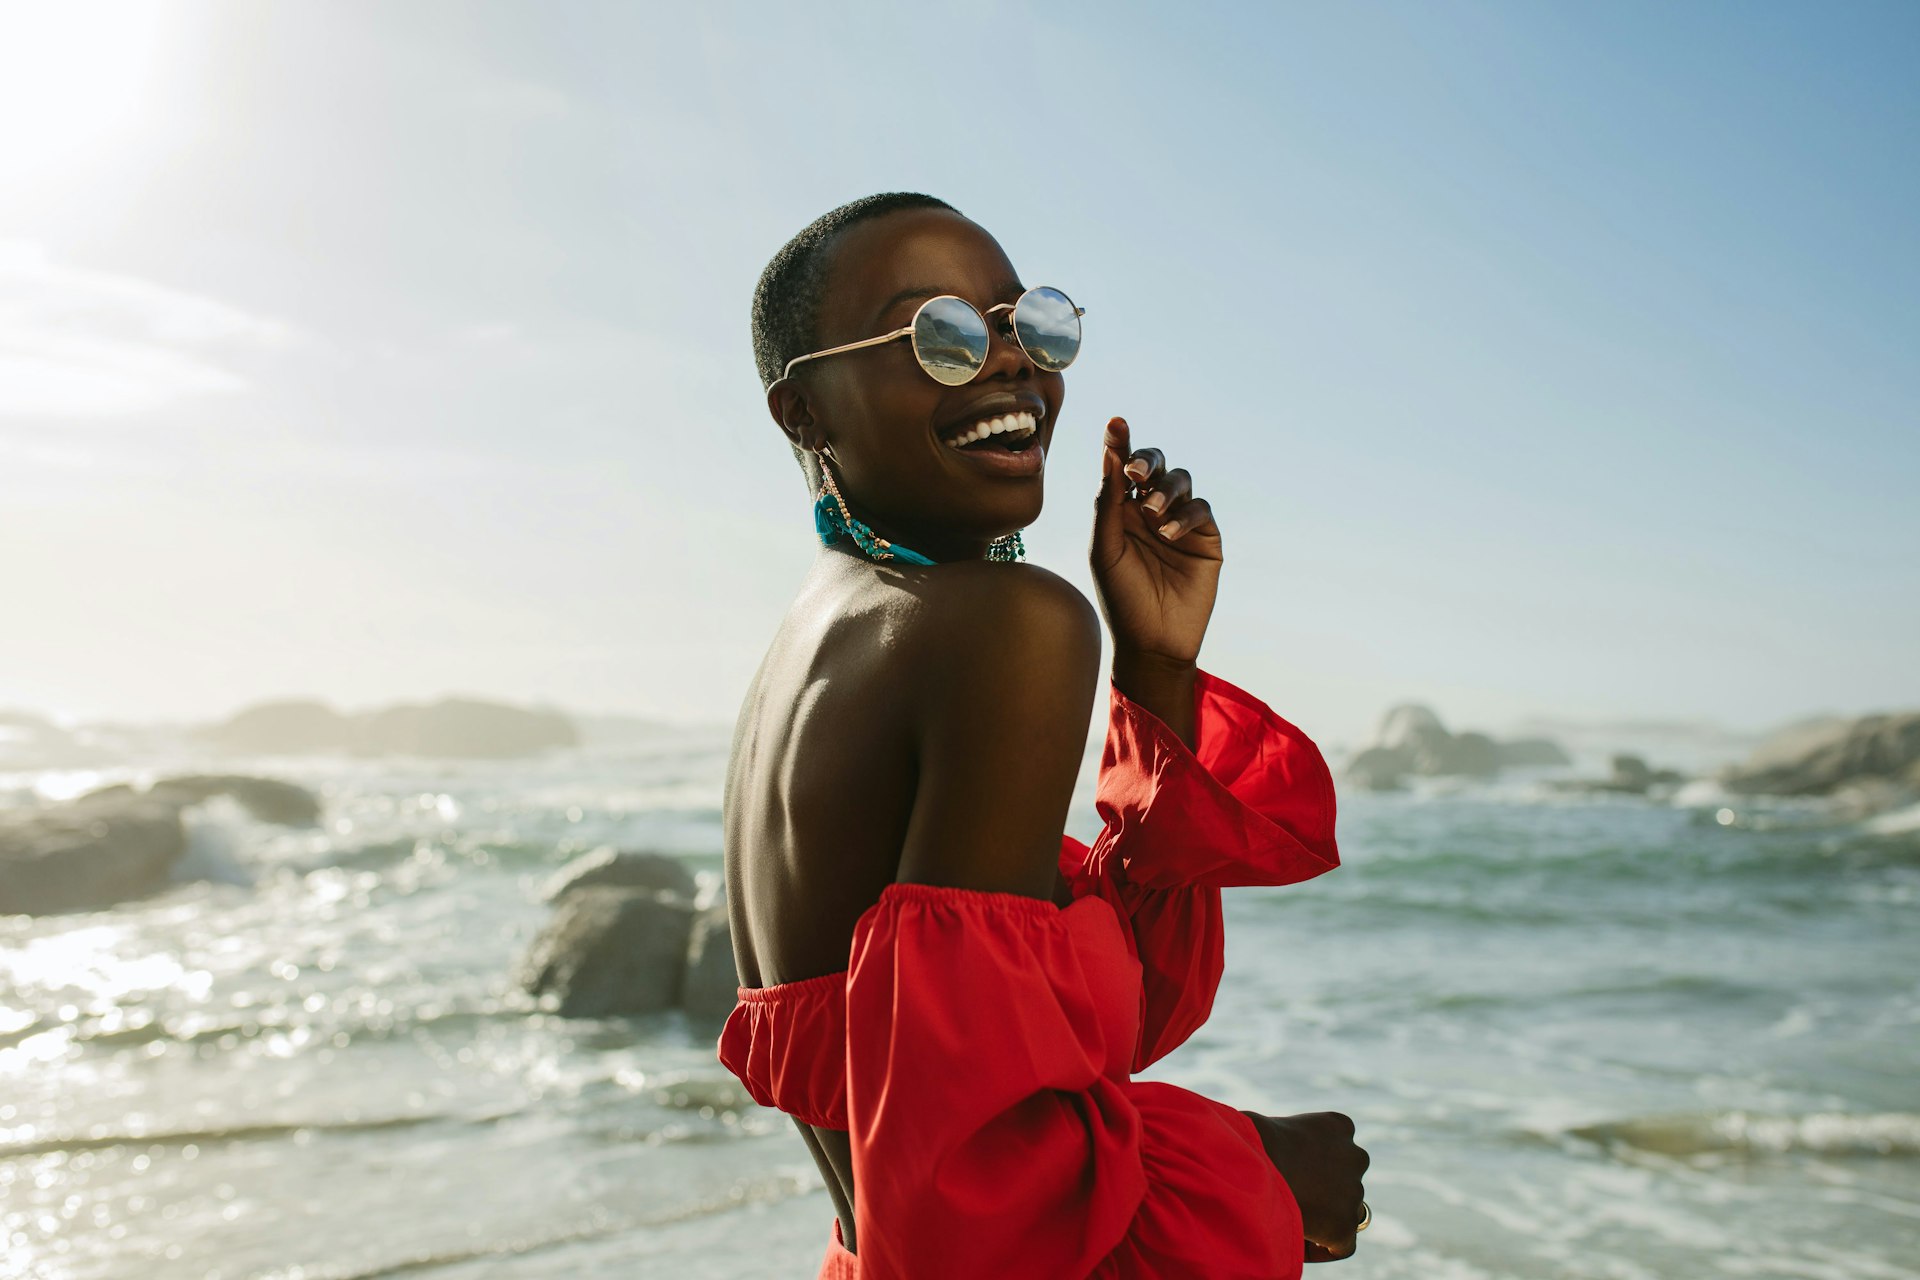 A black woman wearing a red dress and sunglasses looks over her shoulder and laughs while on the beach